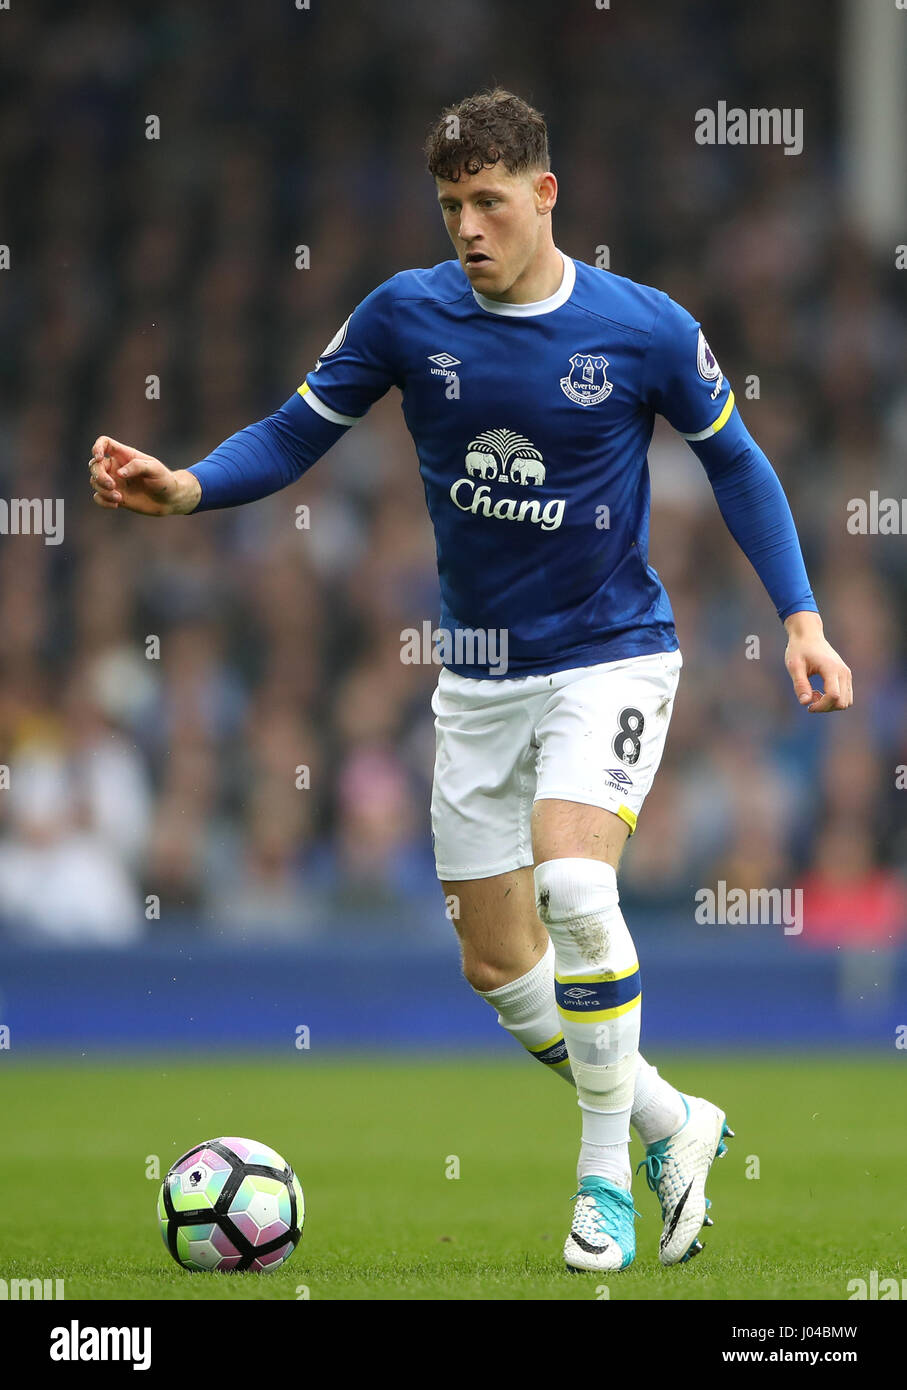 Everton's Ross Barkley during the Premier League match at Goodison Park, Liverpool. PRESS ASSOCIATION Photo. Picture date: Sunday April 9, 2017. See PA story SOCCER Everton. Photo credit should read: Nick Potts/PA Wire. RESTRICTIONS: No use with unauthorised audio, video, data, fixture lists, club/league logos or 'live' services. Online in-match use limited to 75 images, no video emulation. No use in betting, games or single club/league/player publications. Stock Photo